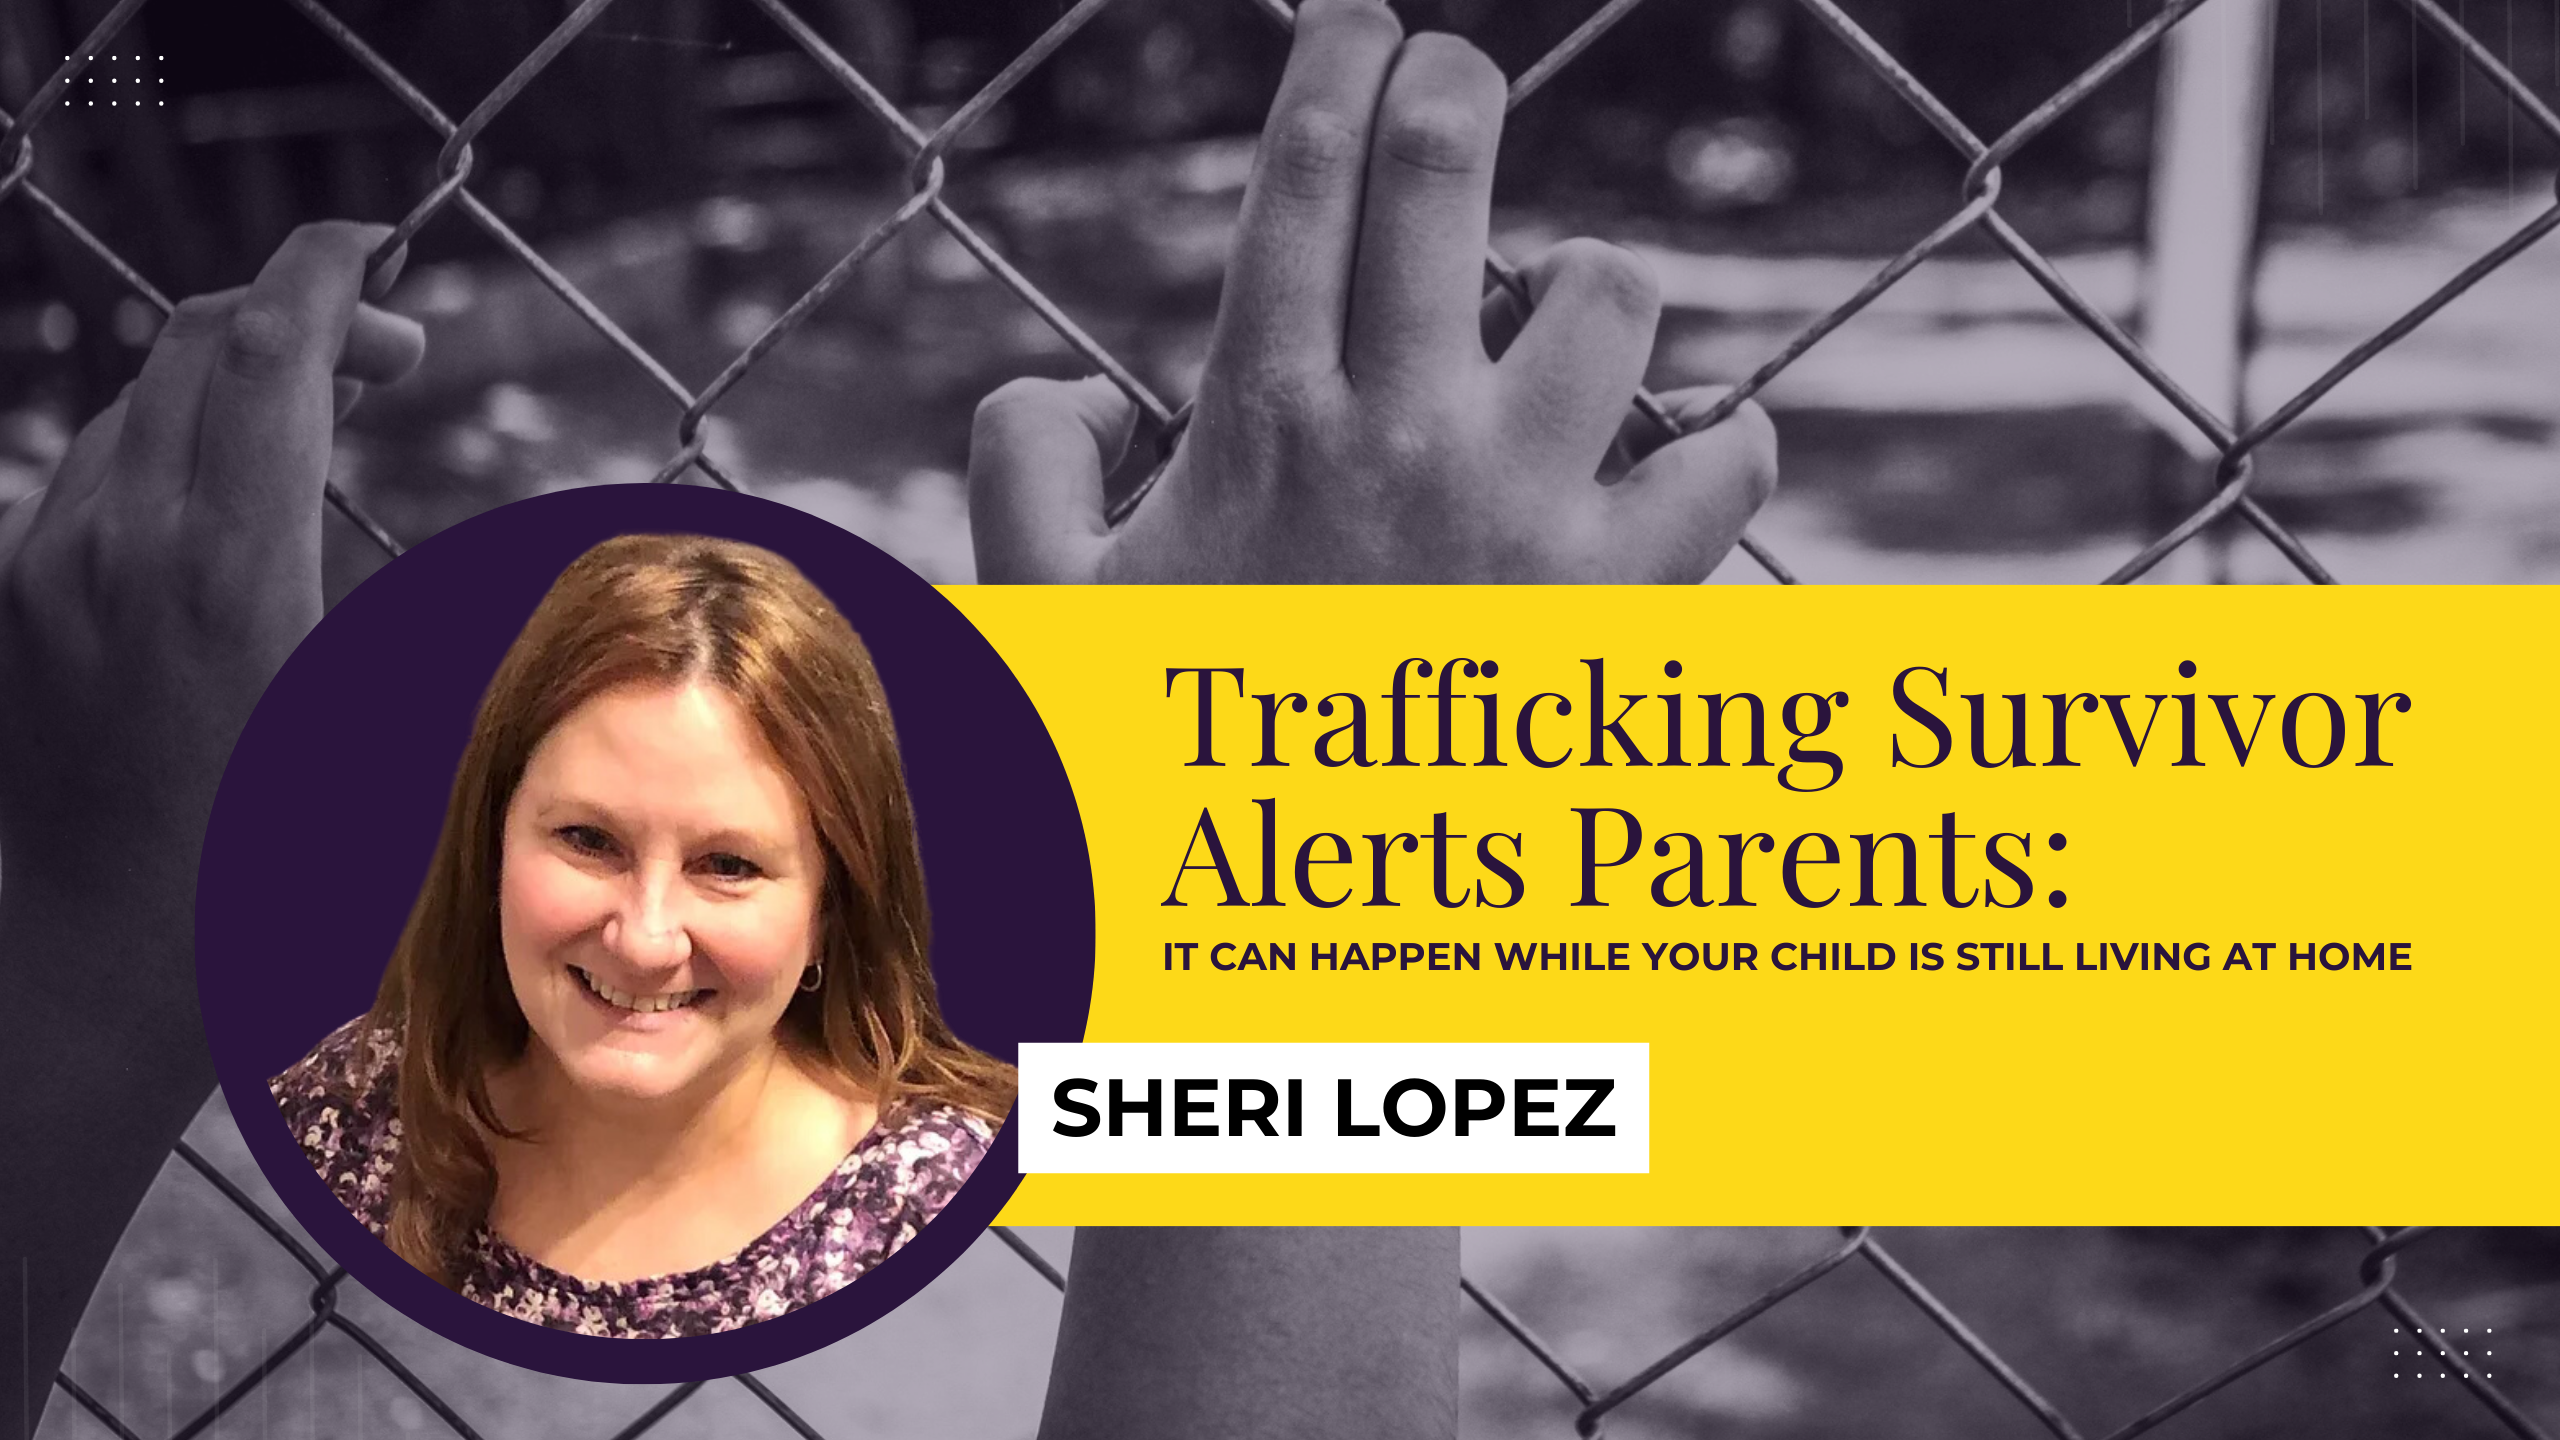 Survivor Alerts Parents: Trafficking Can Happen While Your Child is Still Living at Home